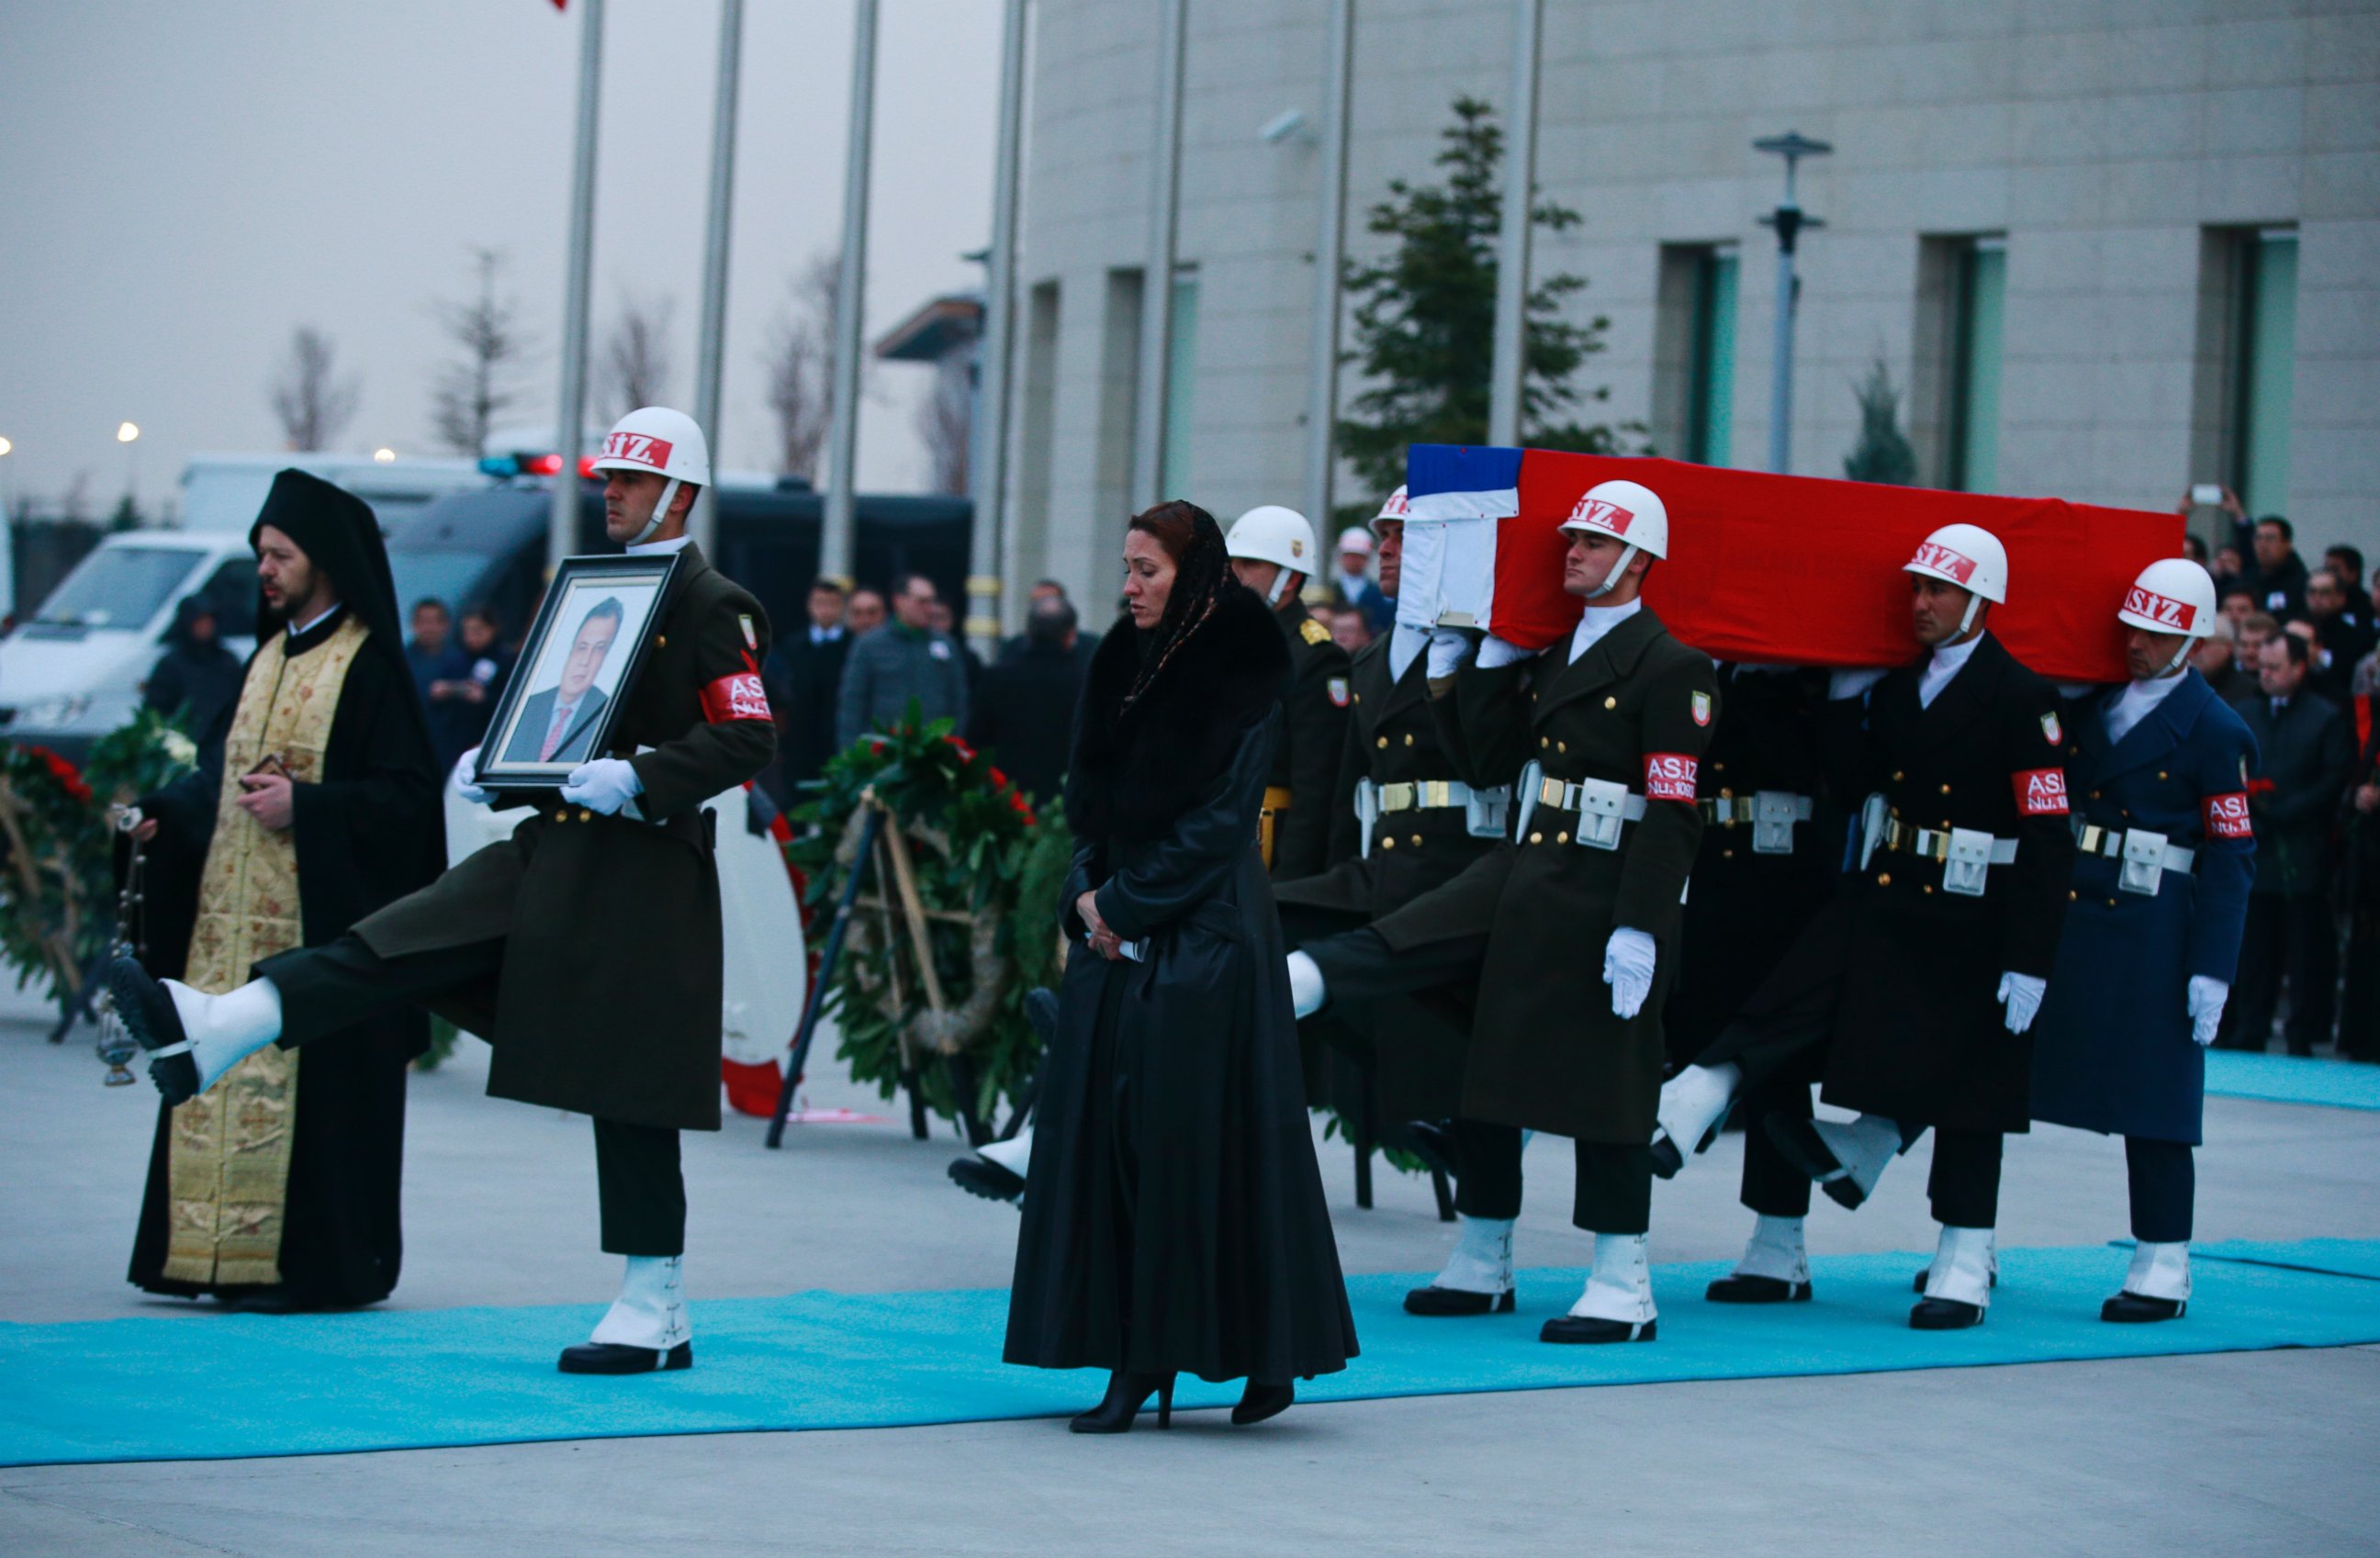 PHOTO: A Turkish honor guard carries the Russian flag-draped coffin of Russian Ambassador to Turkey, Andrei Karlov, who was assassinated Monday, during a ceremony at the airport in Ankara, Turkey, Dec. 20, 2016.